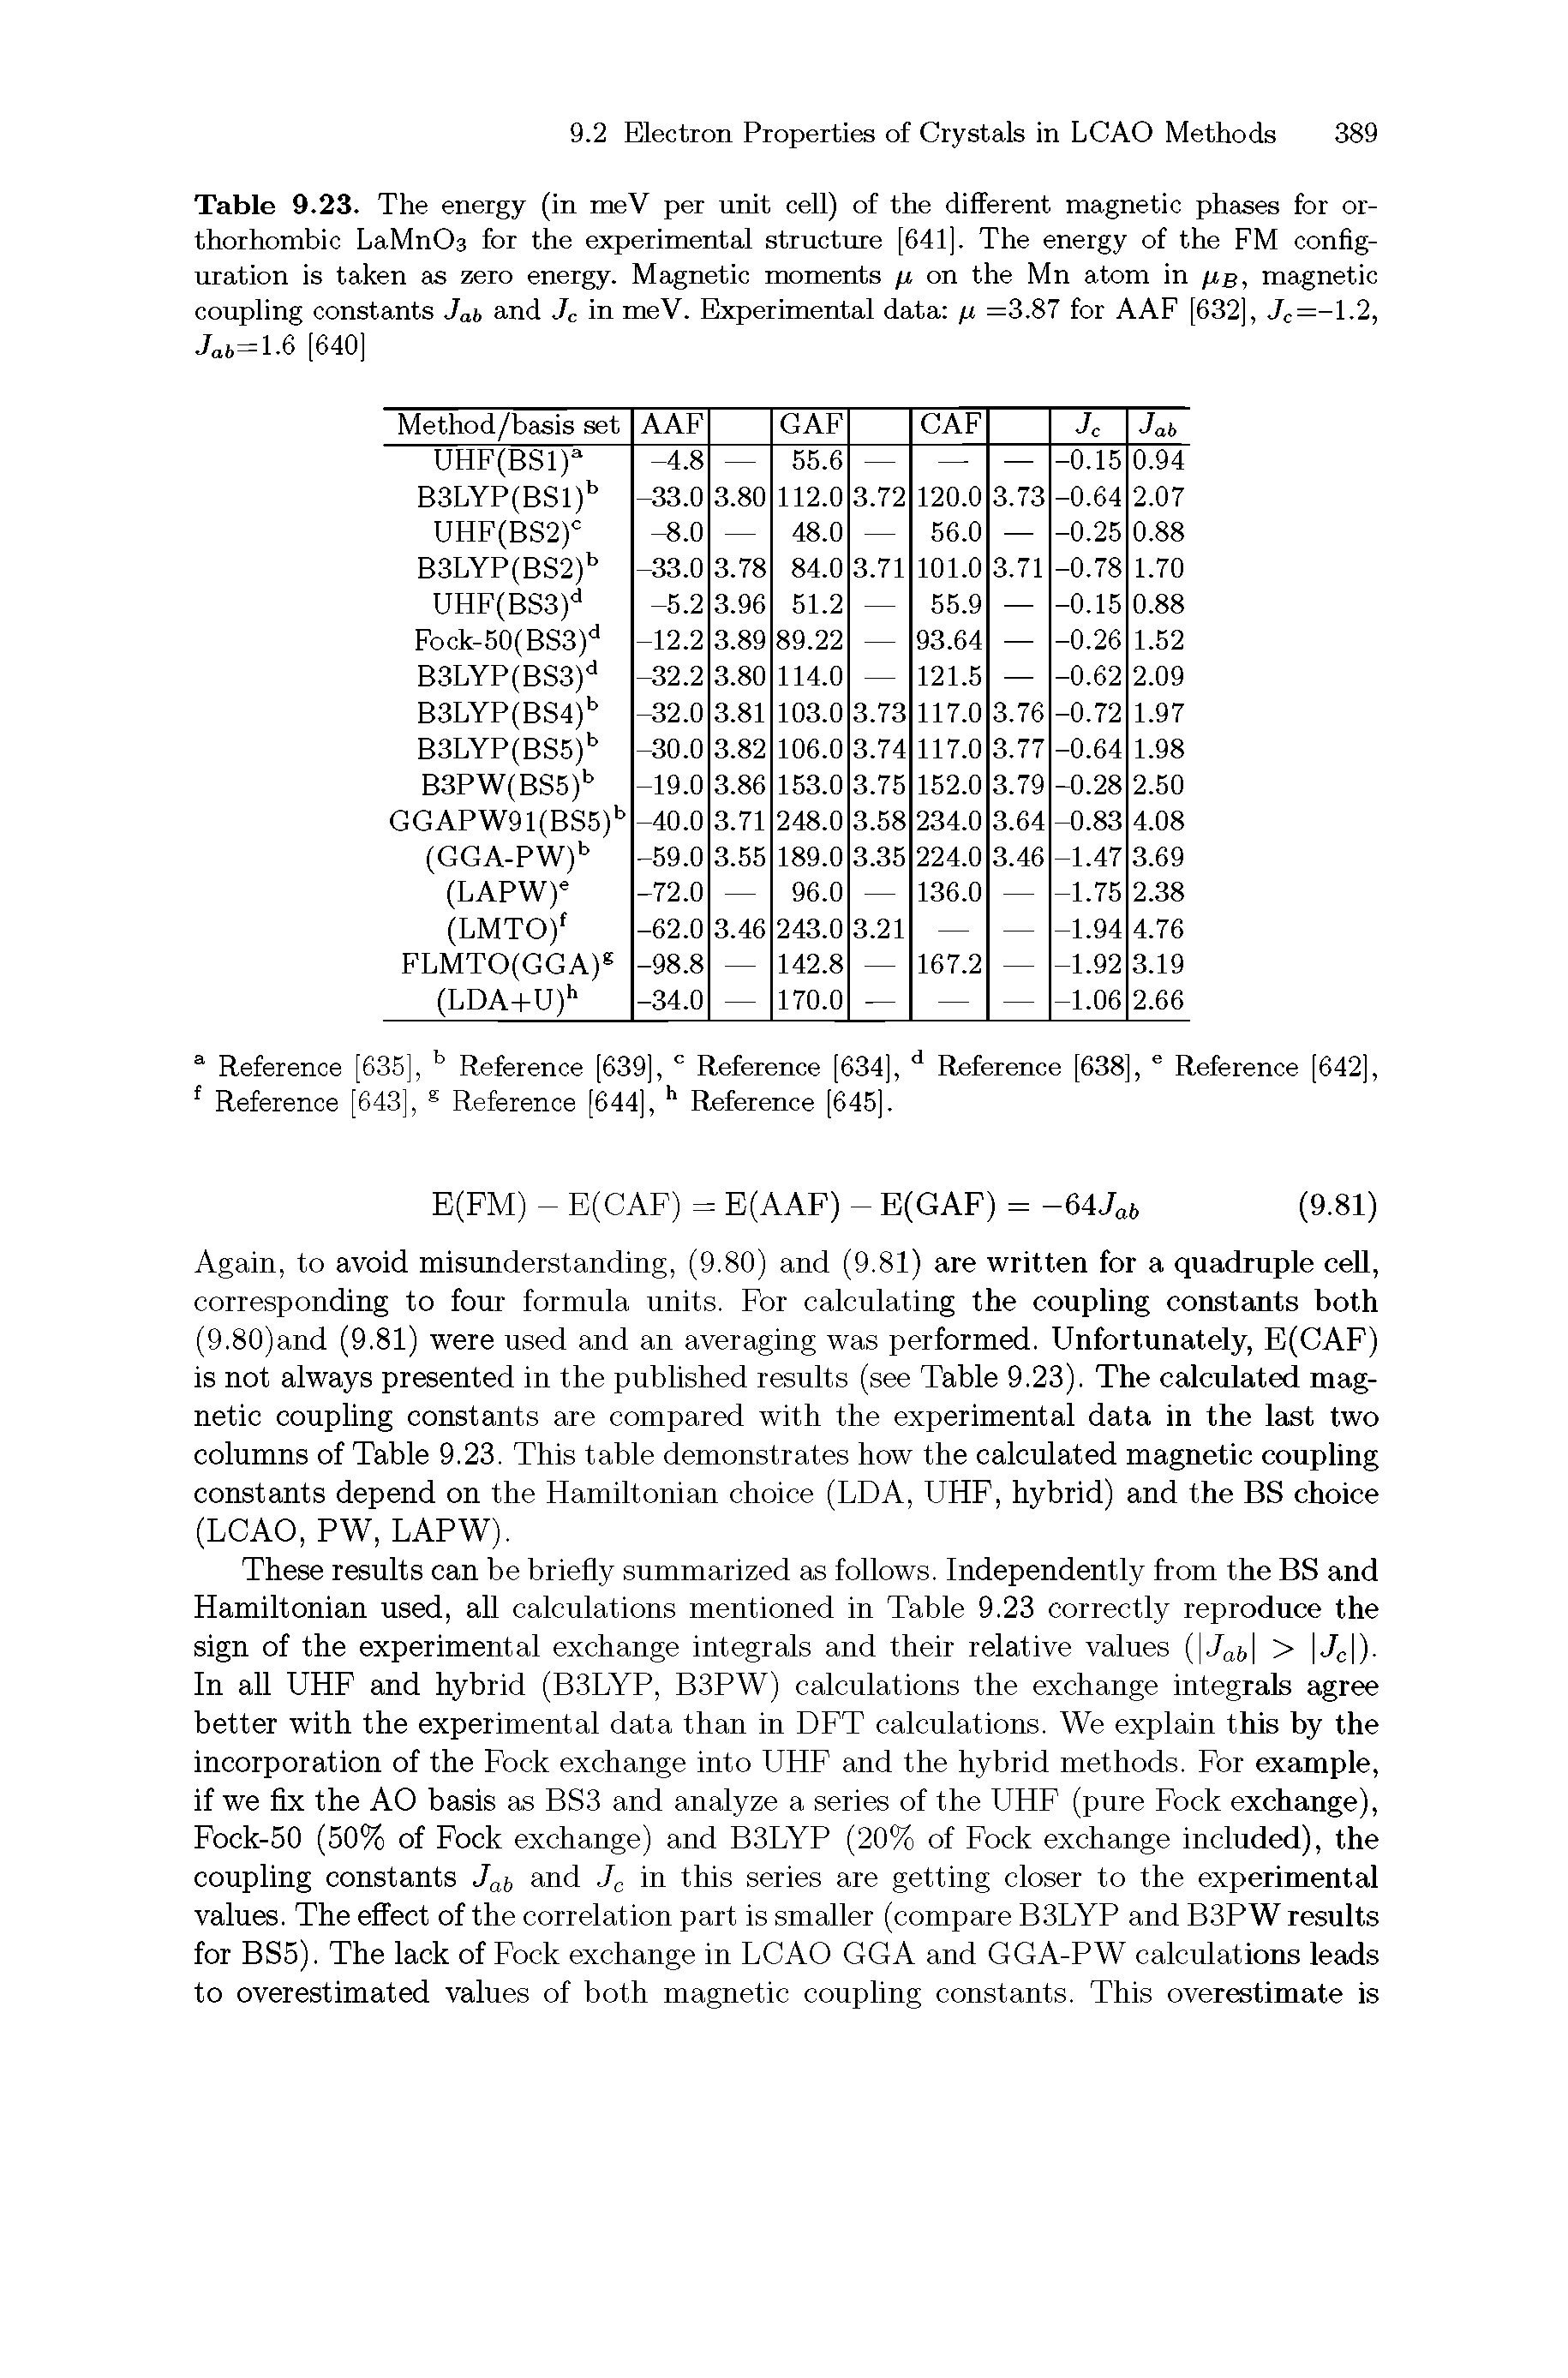 Table 9.23. The energy (in meV per unit cell) of the different magnetic phases for orthorhombic LaMnOa for the experimental structure [641]. The energy of the FM configuration is taken as zero energy. Magnetic moments on the Mn atom in /rg, magnetic coupling constants Jab and Jc in meV. Experimental data /u =3.87 for AAF [632], Jc=-1.2, Jat= 1.6 [640]...